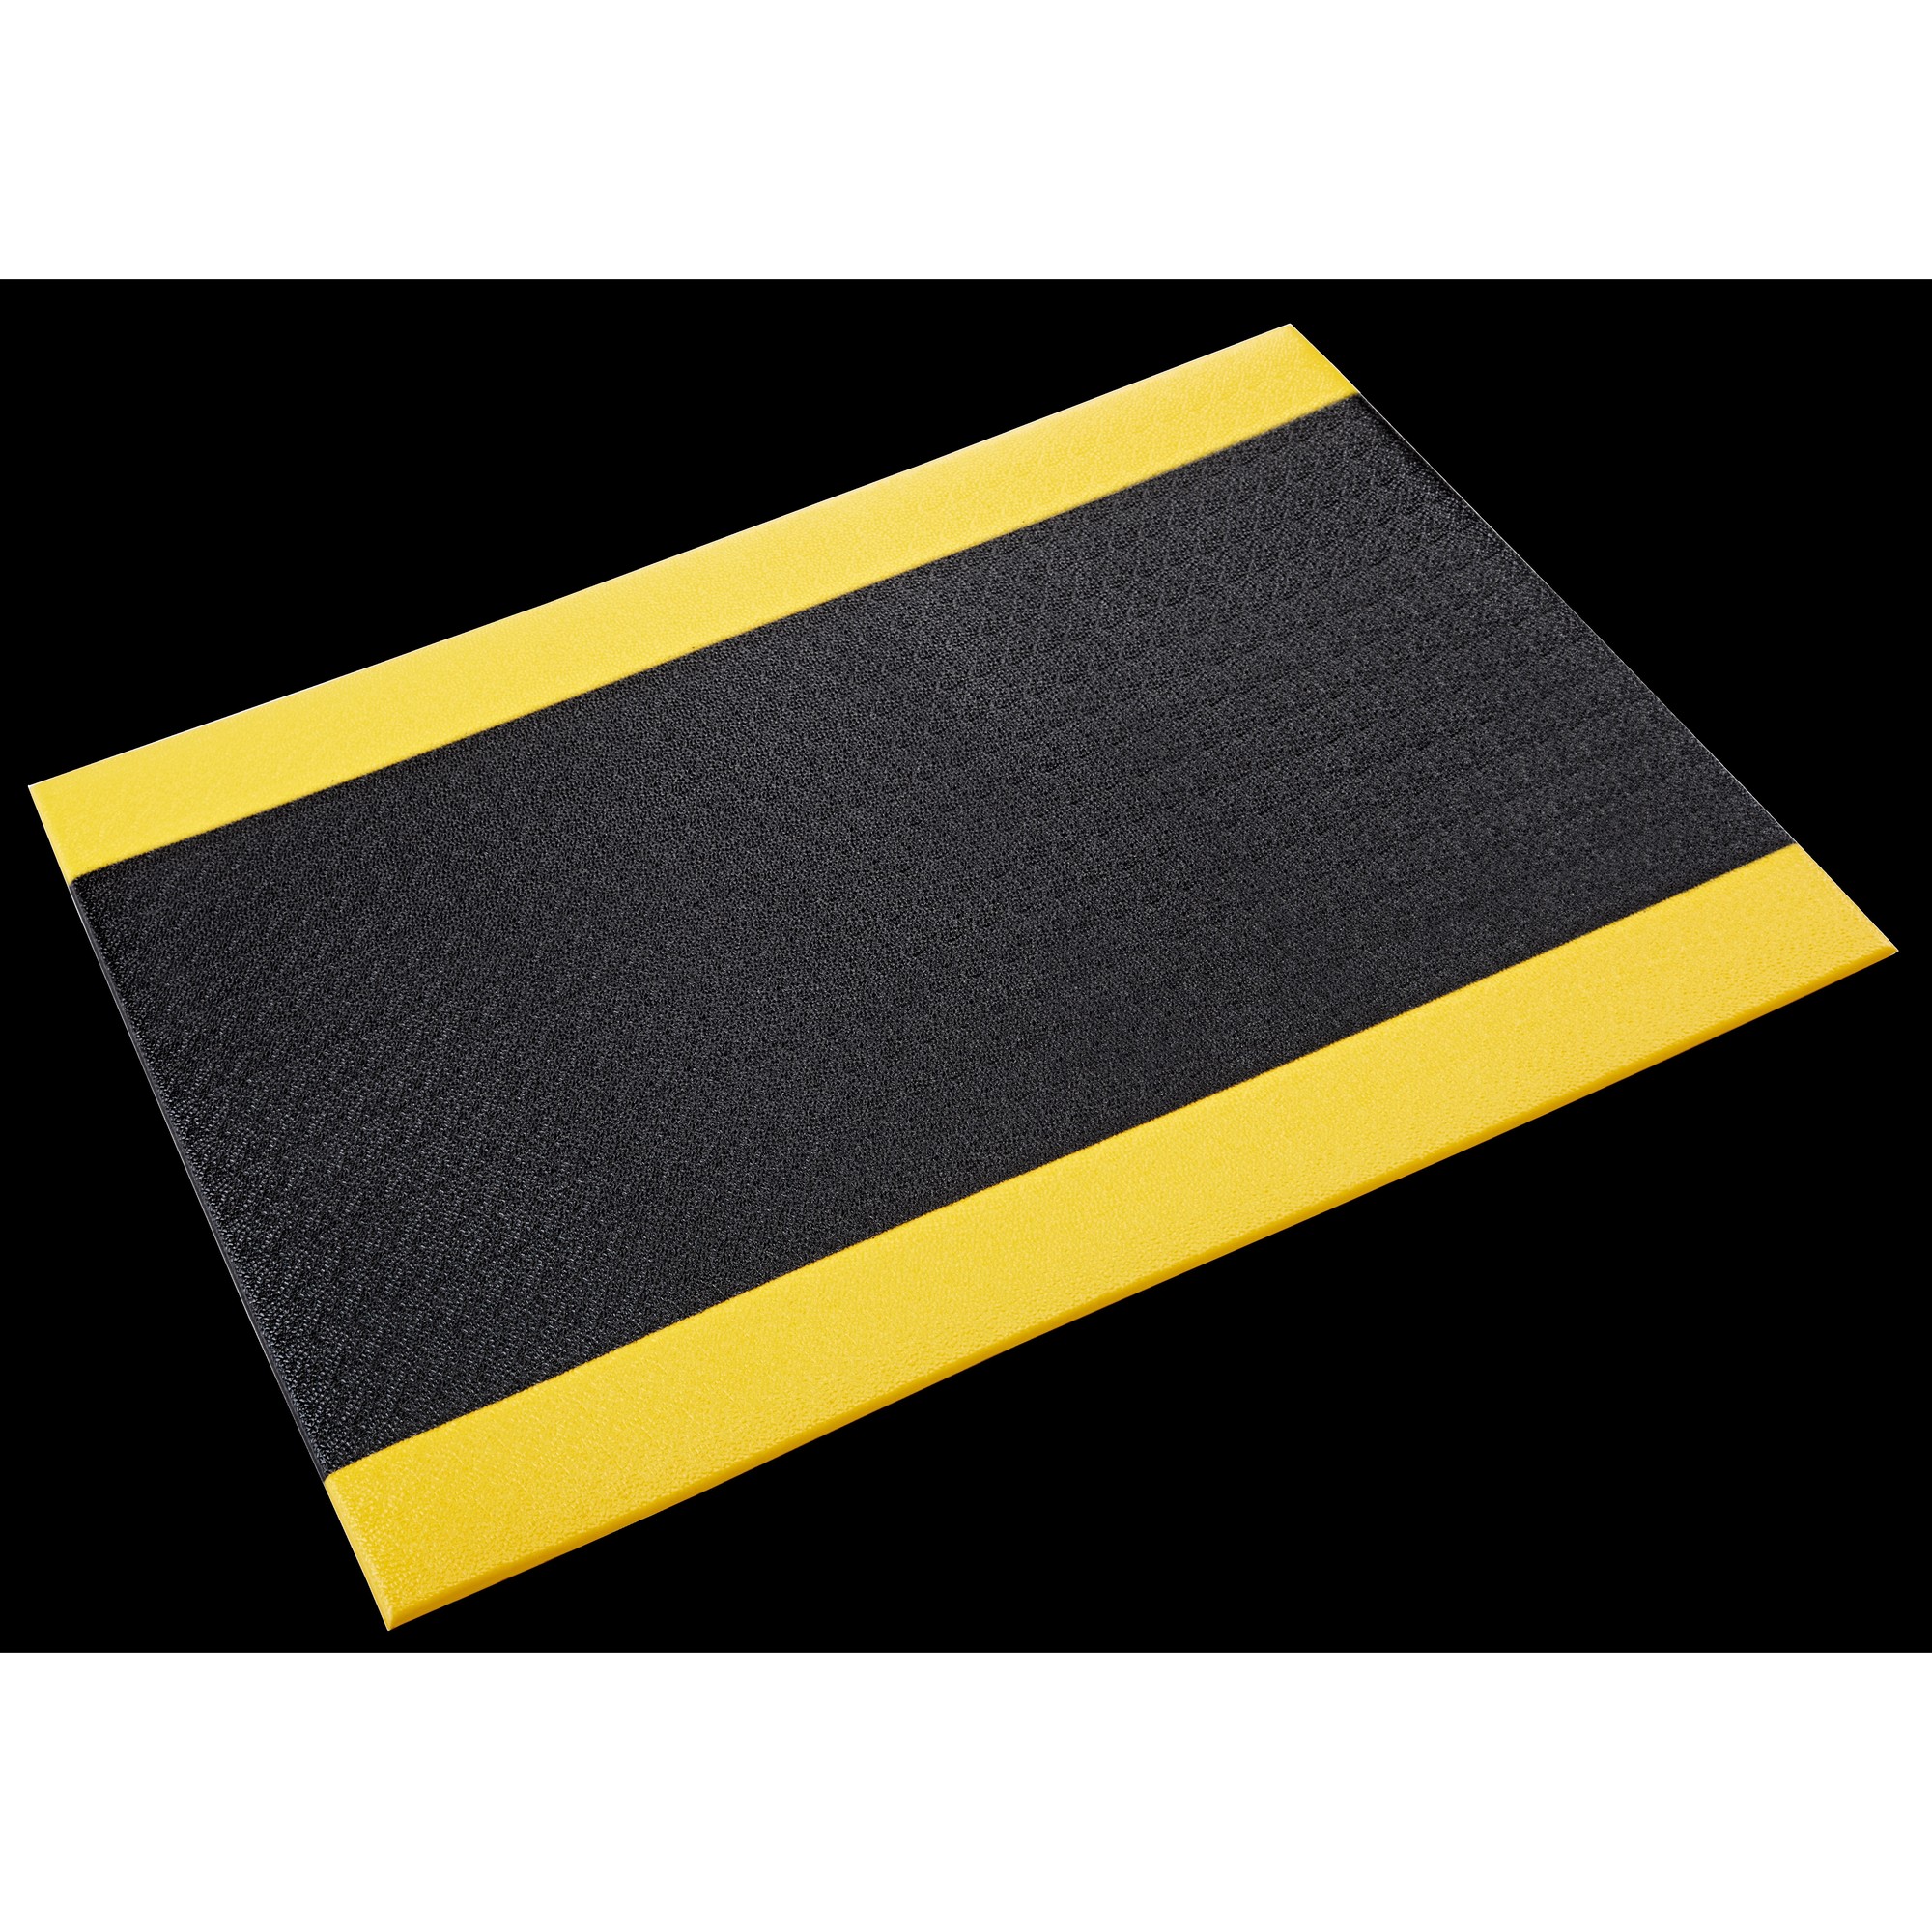 Crown Matting Technologies, Tuff-Spun 3/8 Pebble-Surface 3ft.x12ft. Black w/Yellow, Width 36 in, Length 144 in, Thickness 3/8 in, Model SE 3832BP